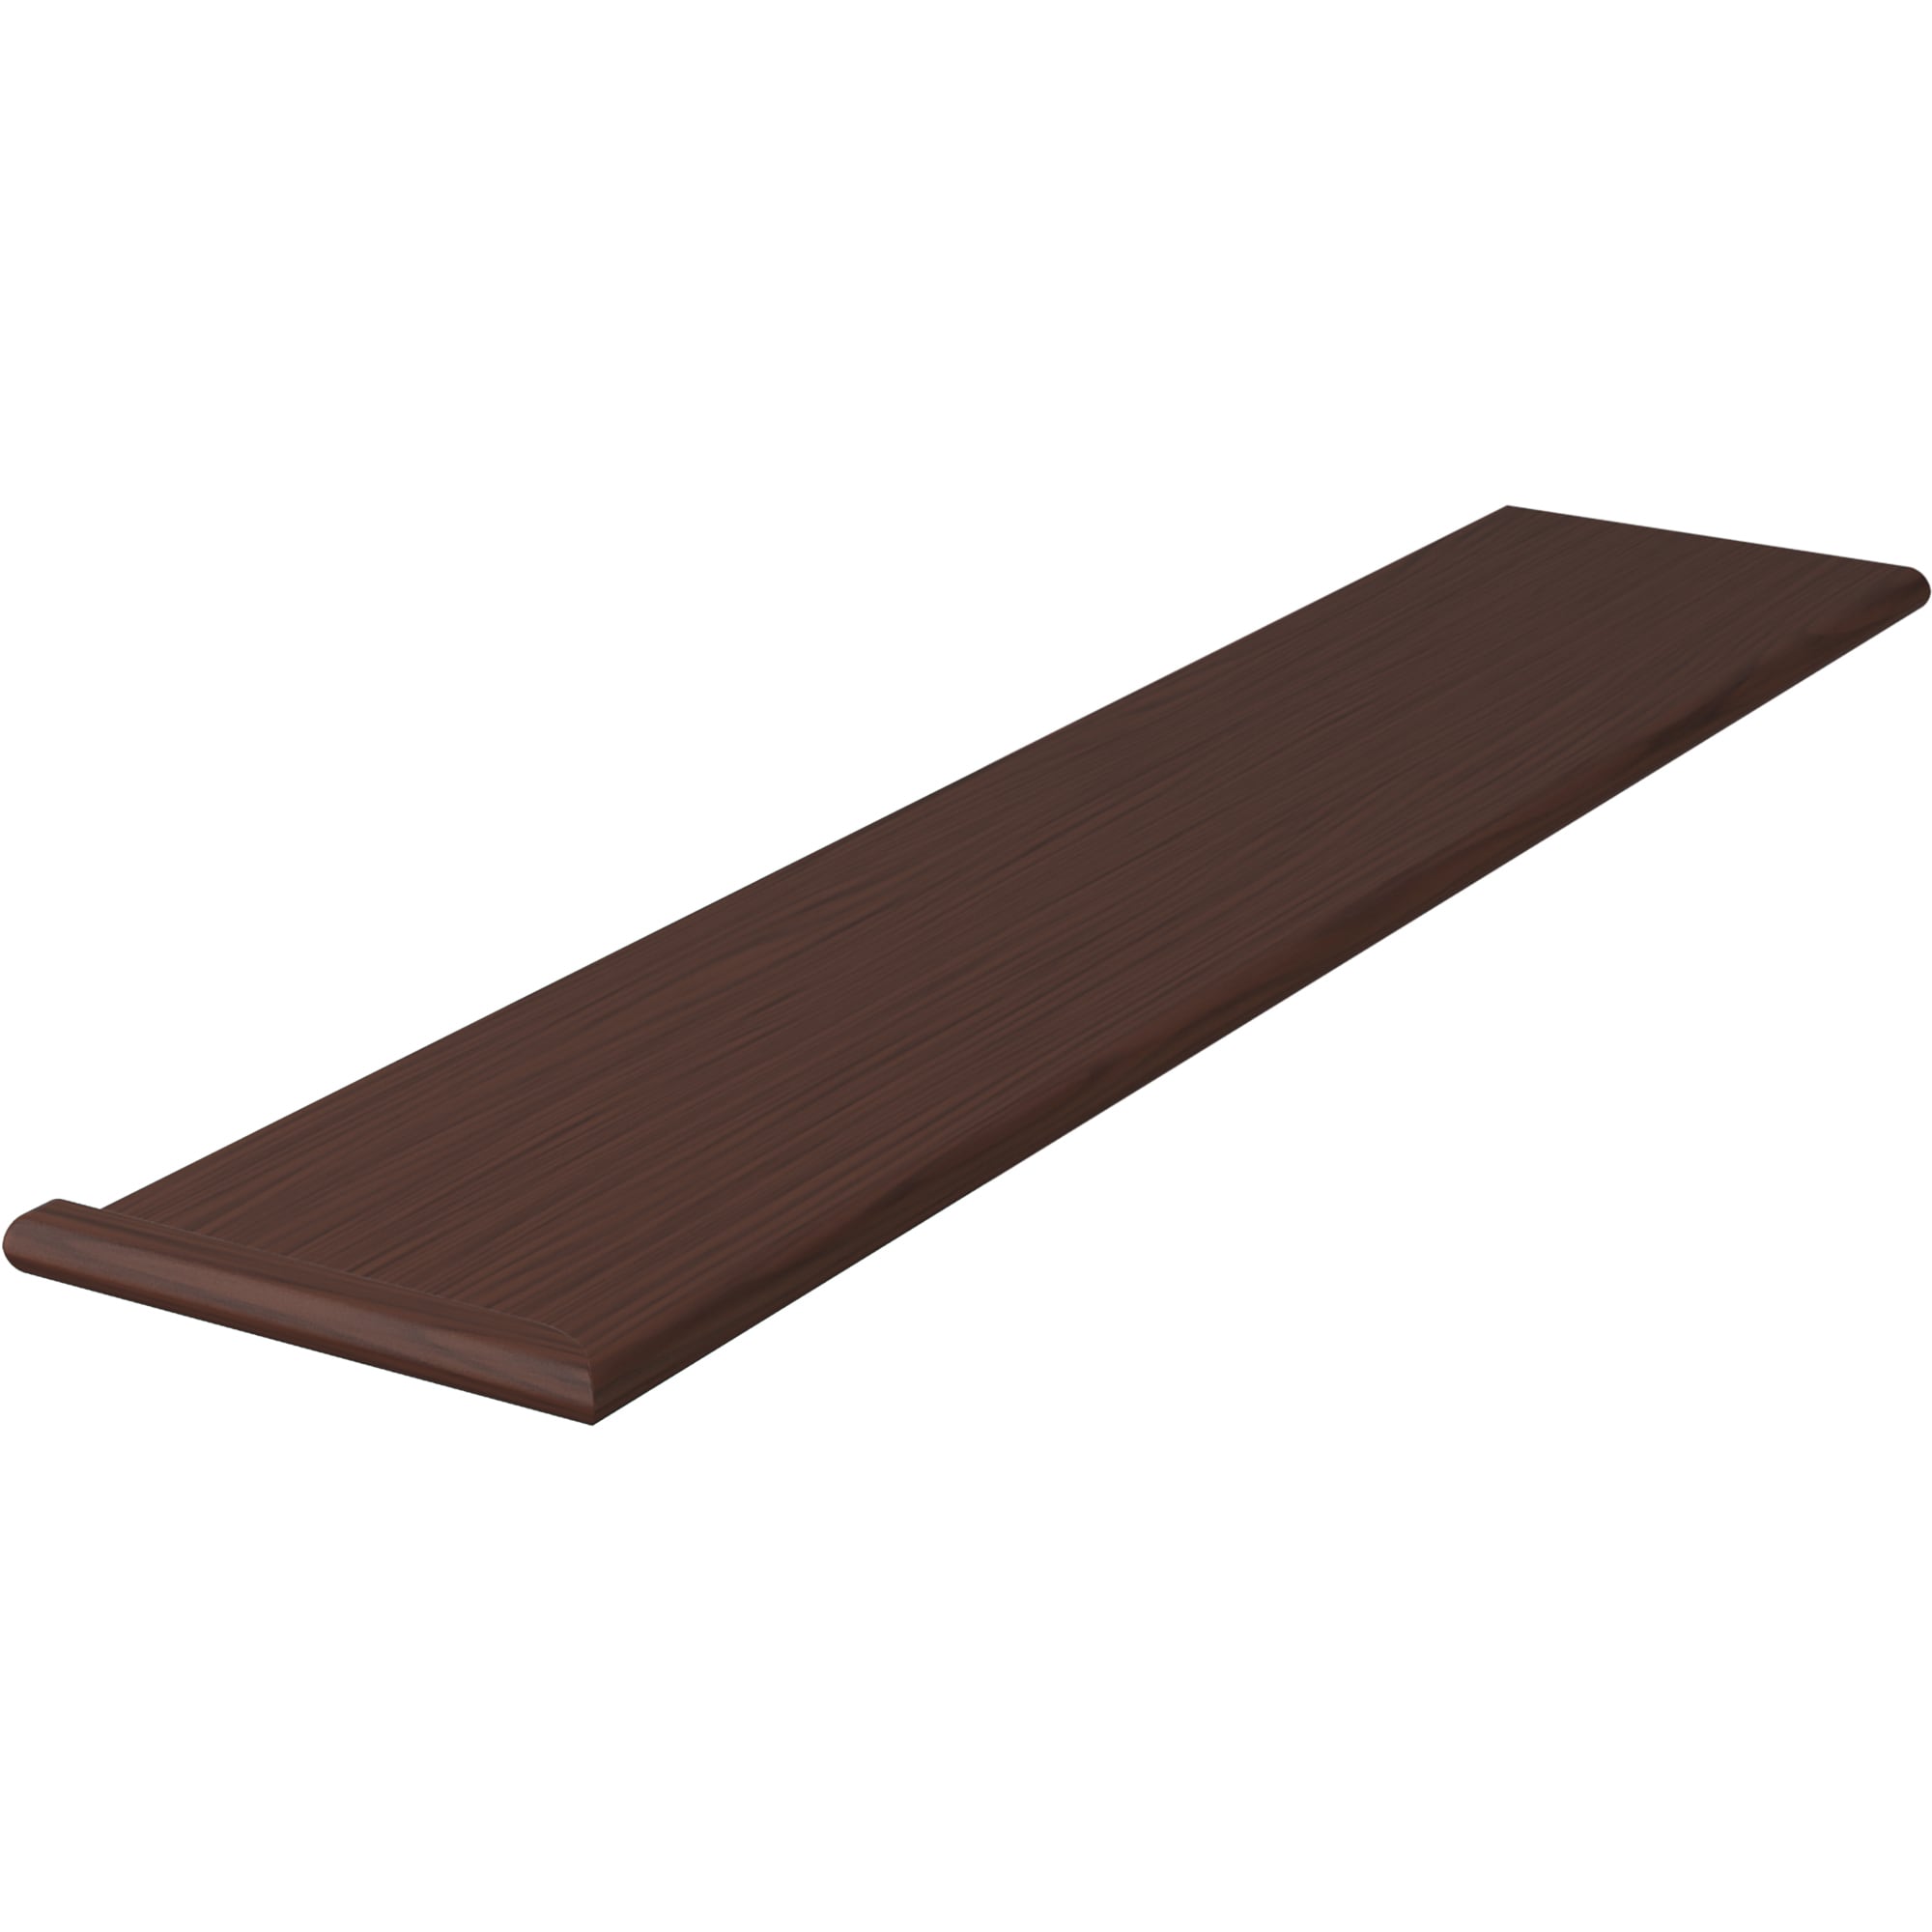 L.J. Smith Stair Systems 10.5-in x 48-in x 1-in Brown Walnut